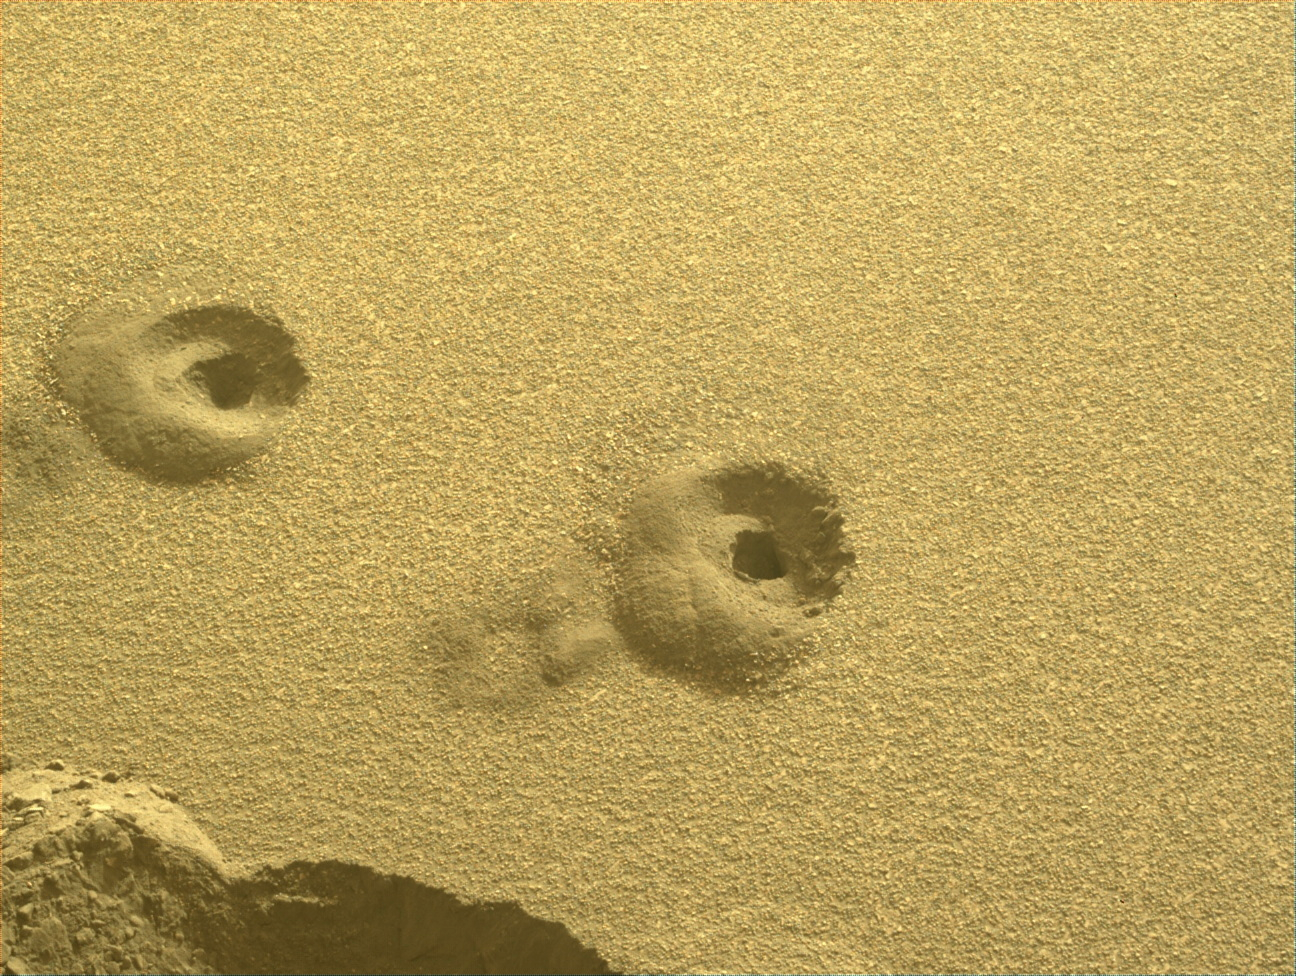 Image taken was taken by the Mars Perseverance rover after collecting the rock sample 18 at Crosswind Lake. This image shows both samples 17 and 18 drill holes nearby.